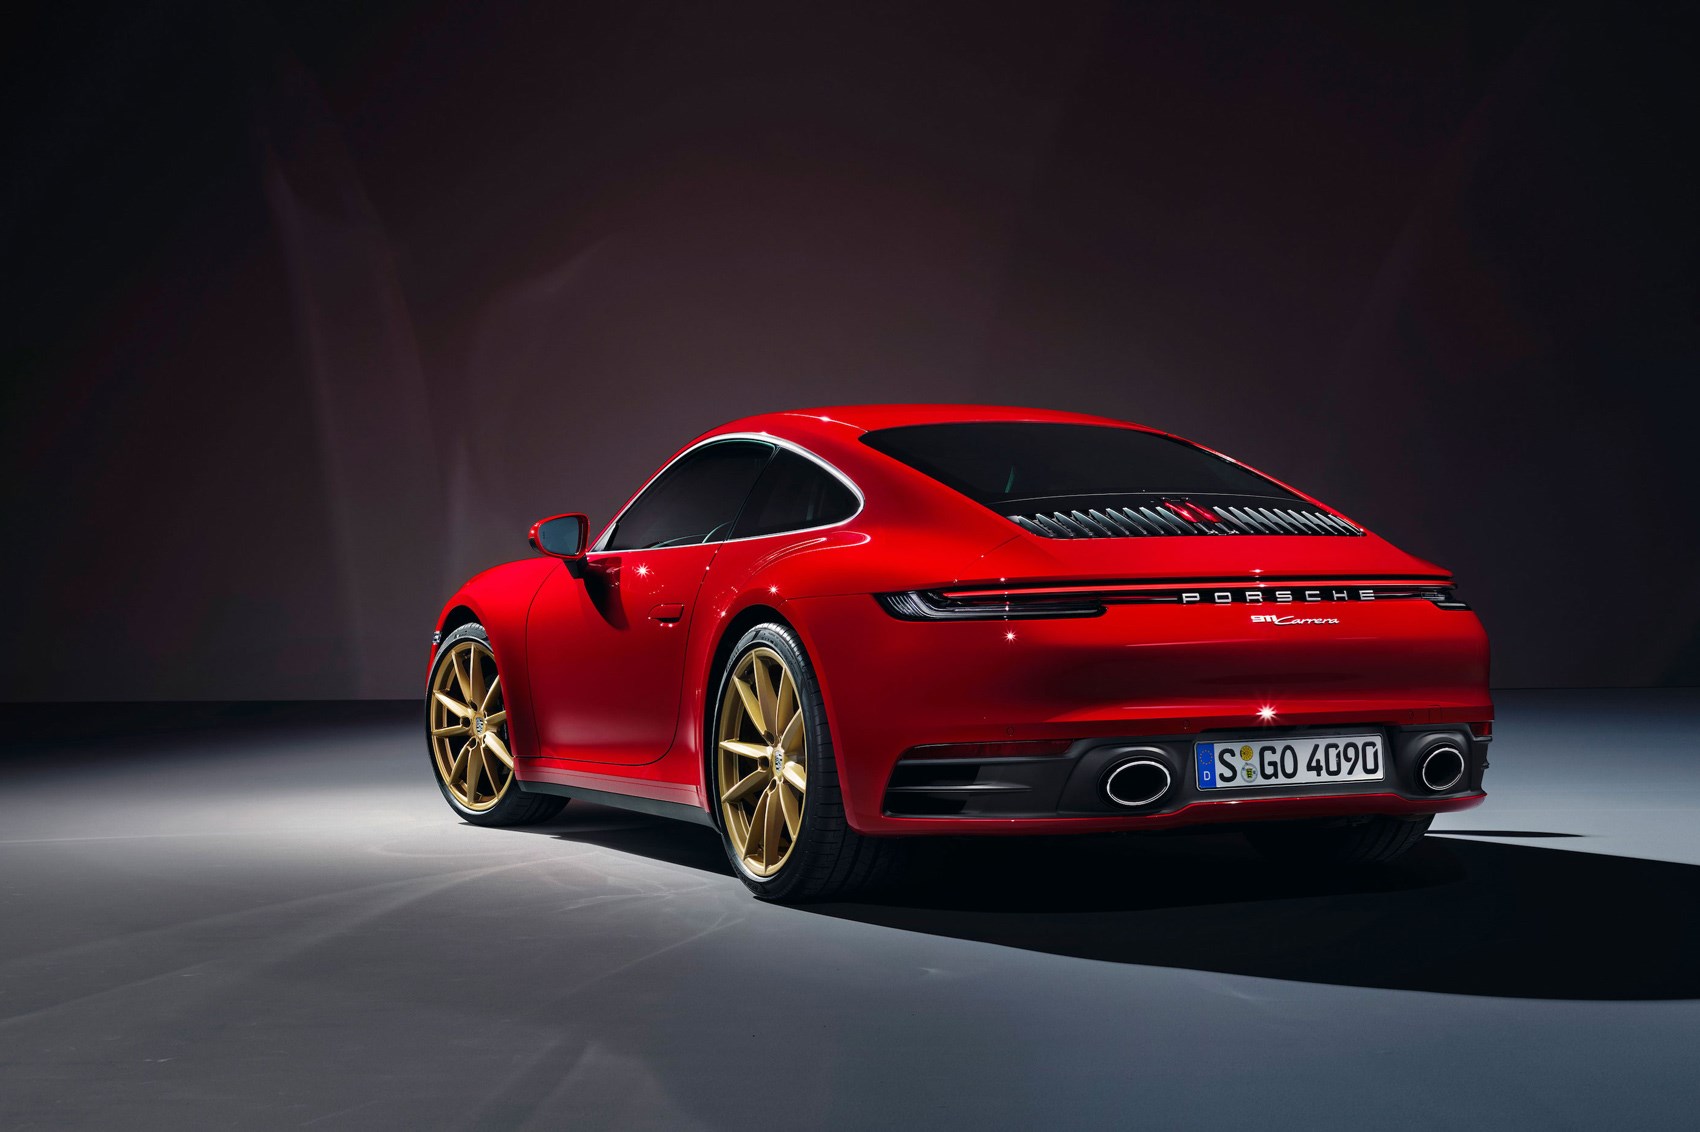 Porsche's EV plans: electric Cayman confirmed, luxury e-SUV on the way